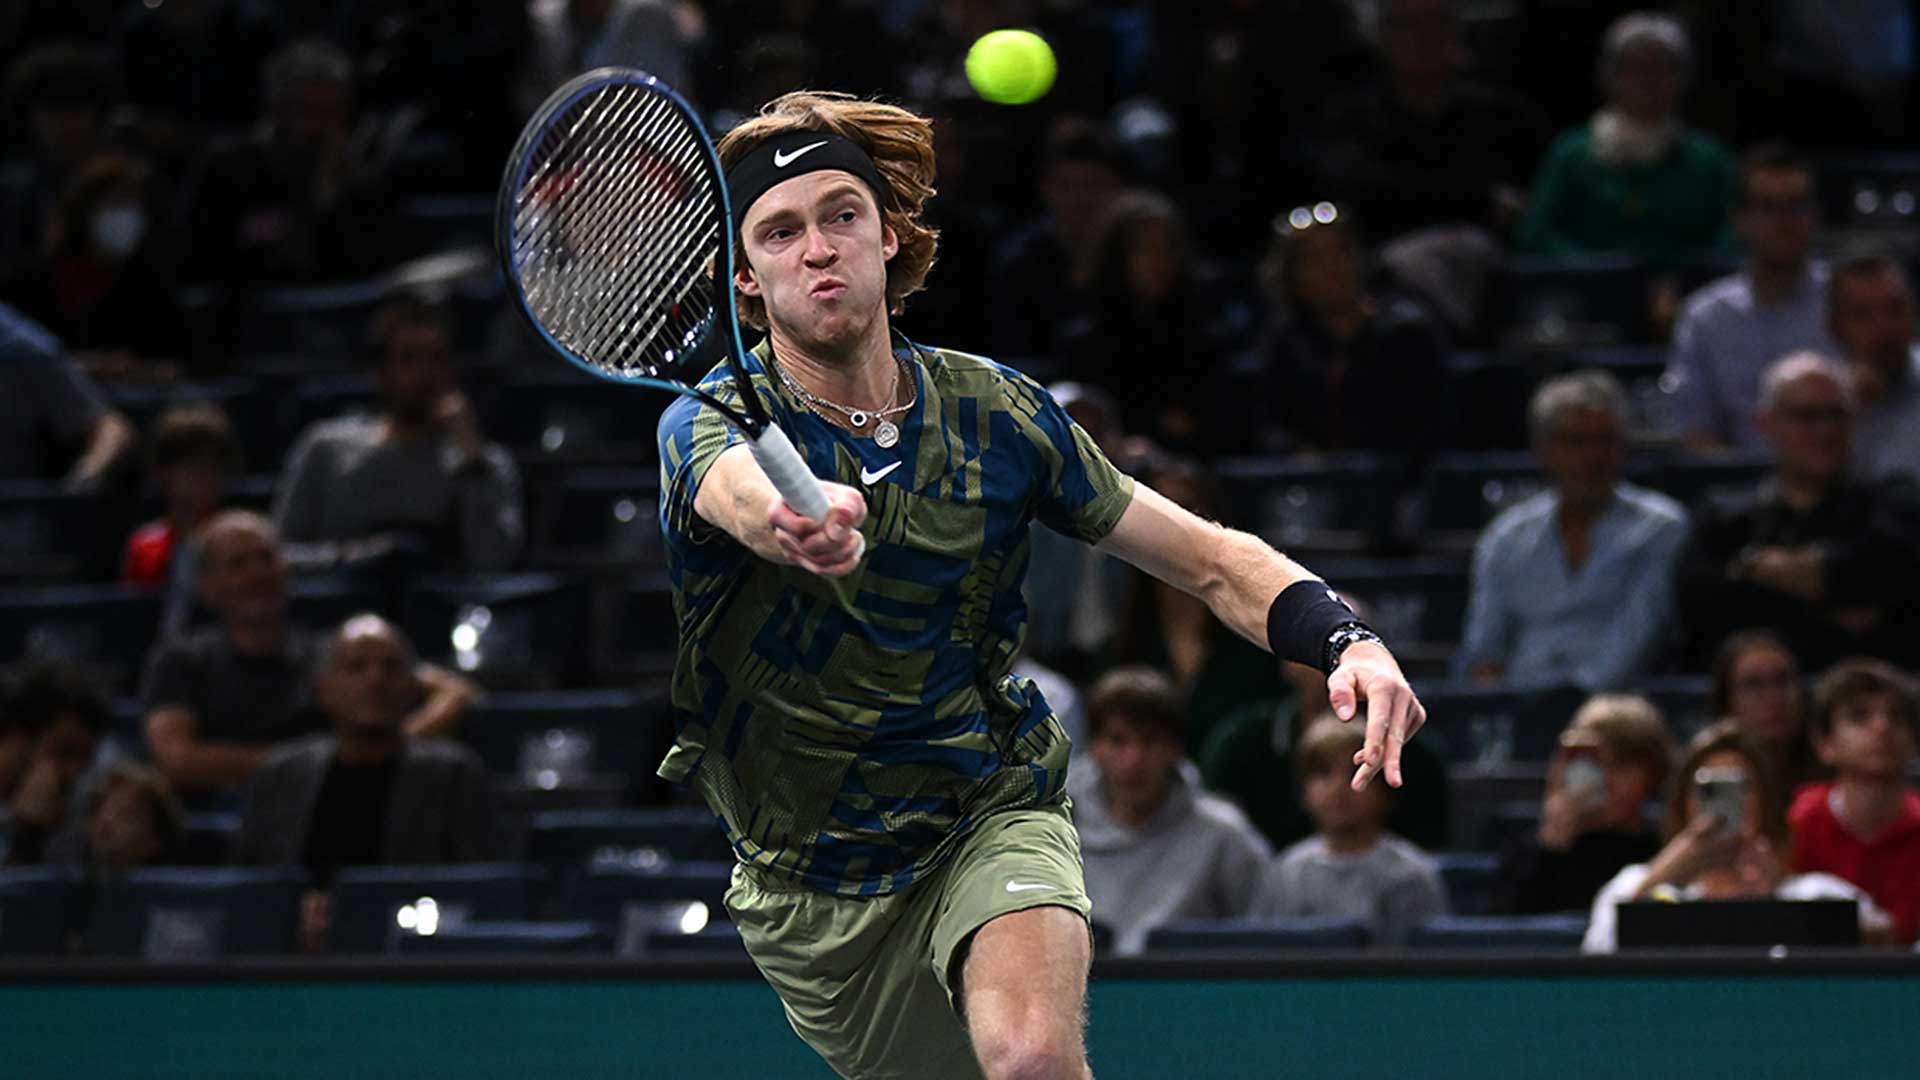 Andrey Rublev earns his 49th tour-level win of the season on Tuesday in Paris.